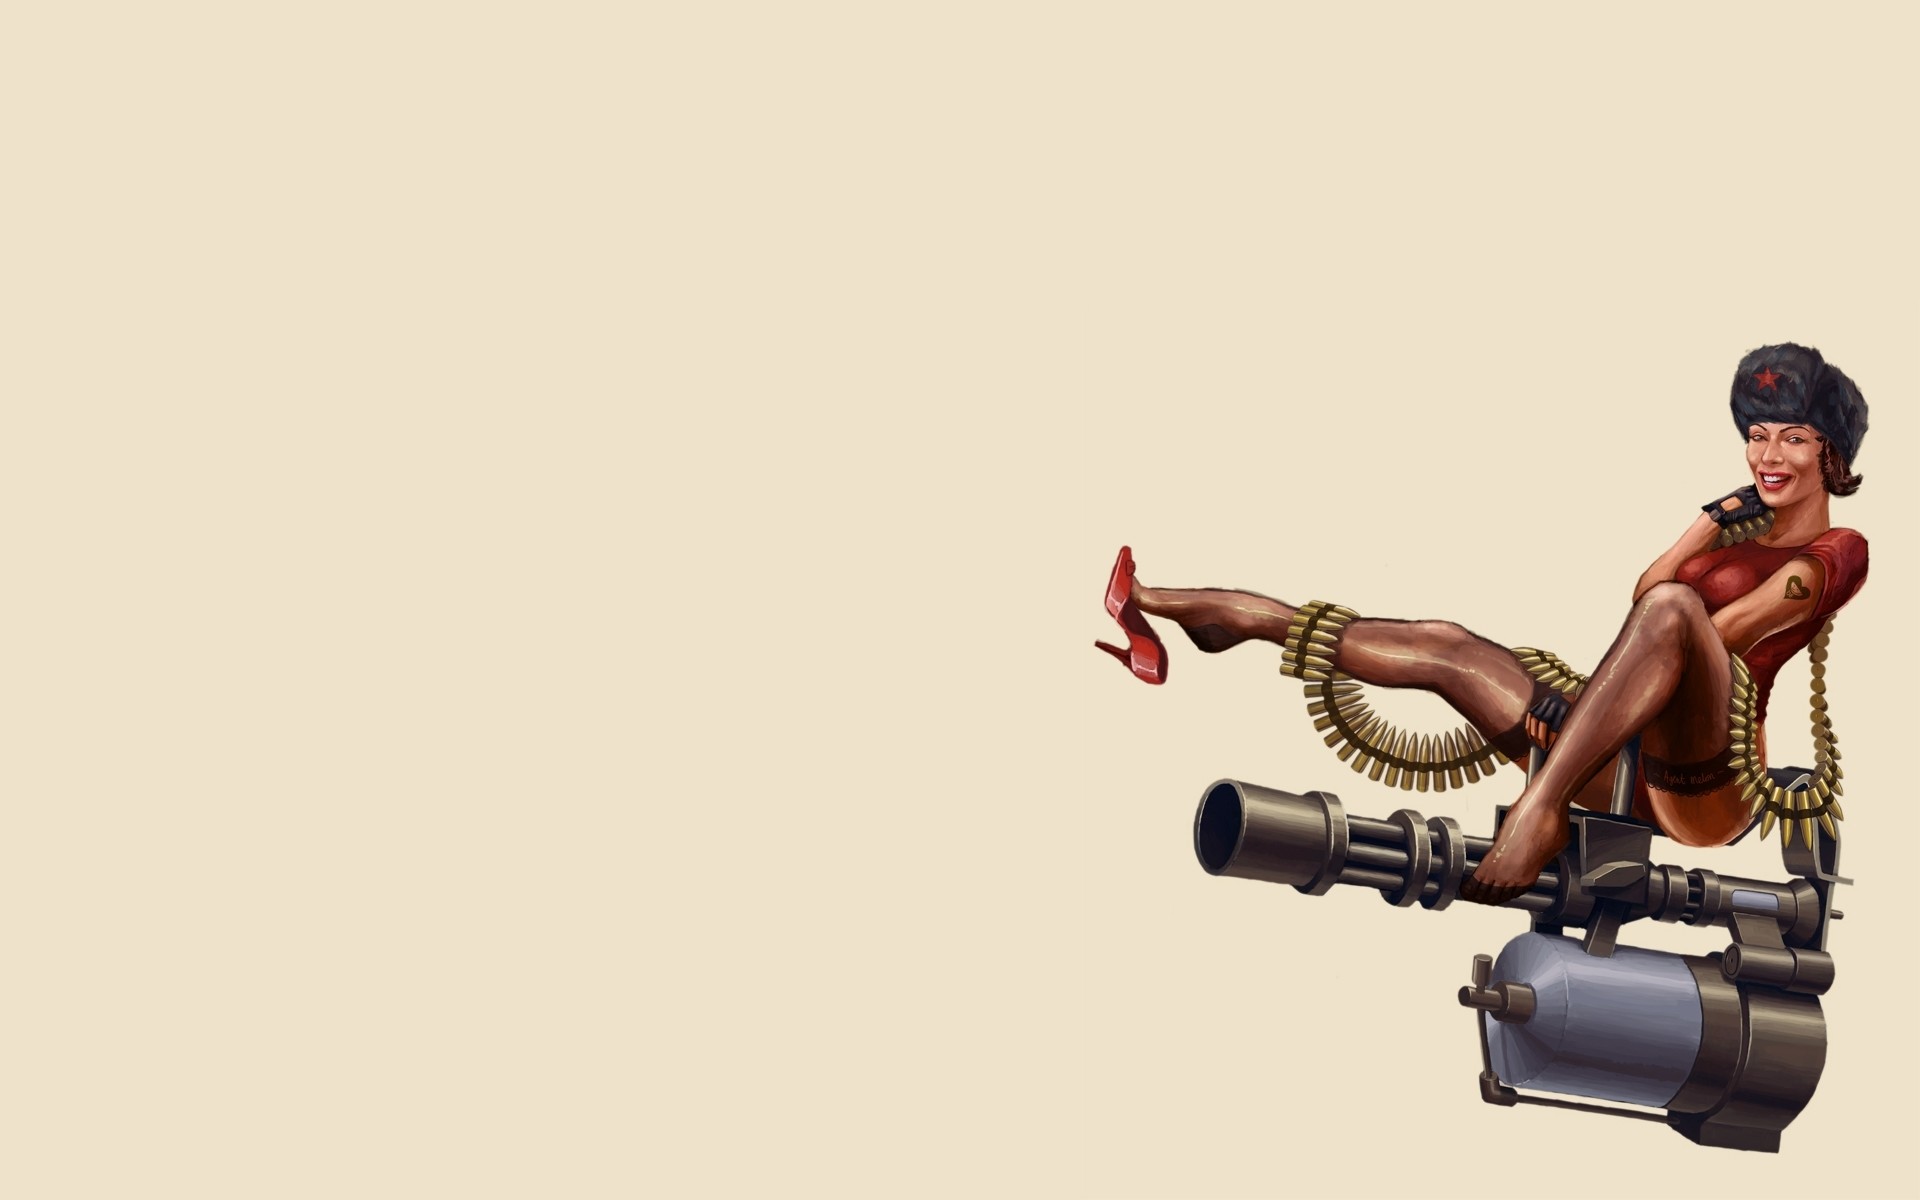 1920x1200 Tattoos stockings soviet weapons high heels team fortress 2 sitting simple background  pin up girls Wallpaper